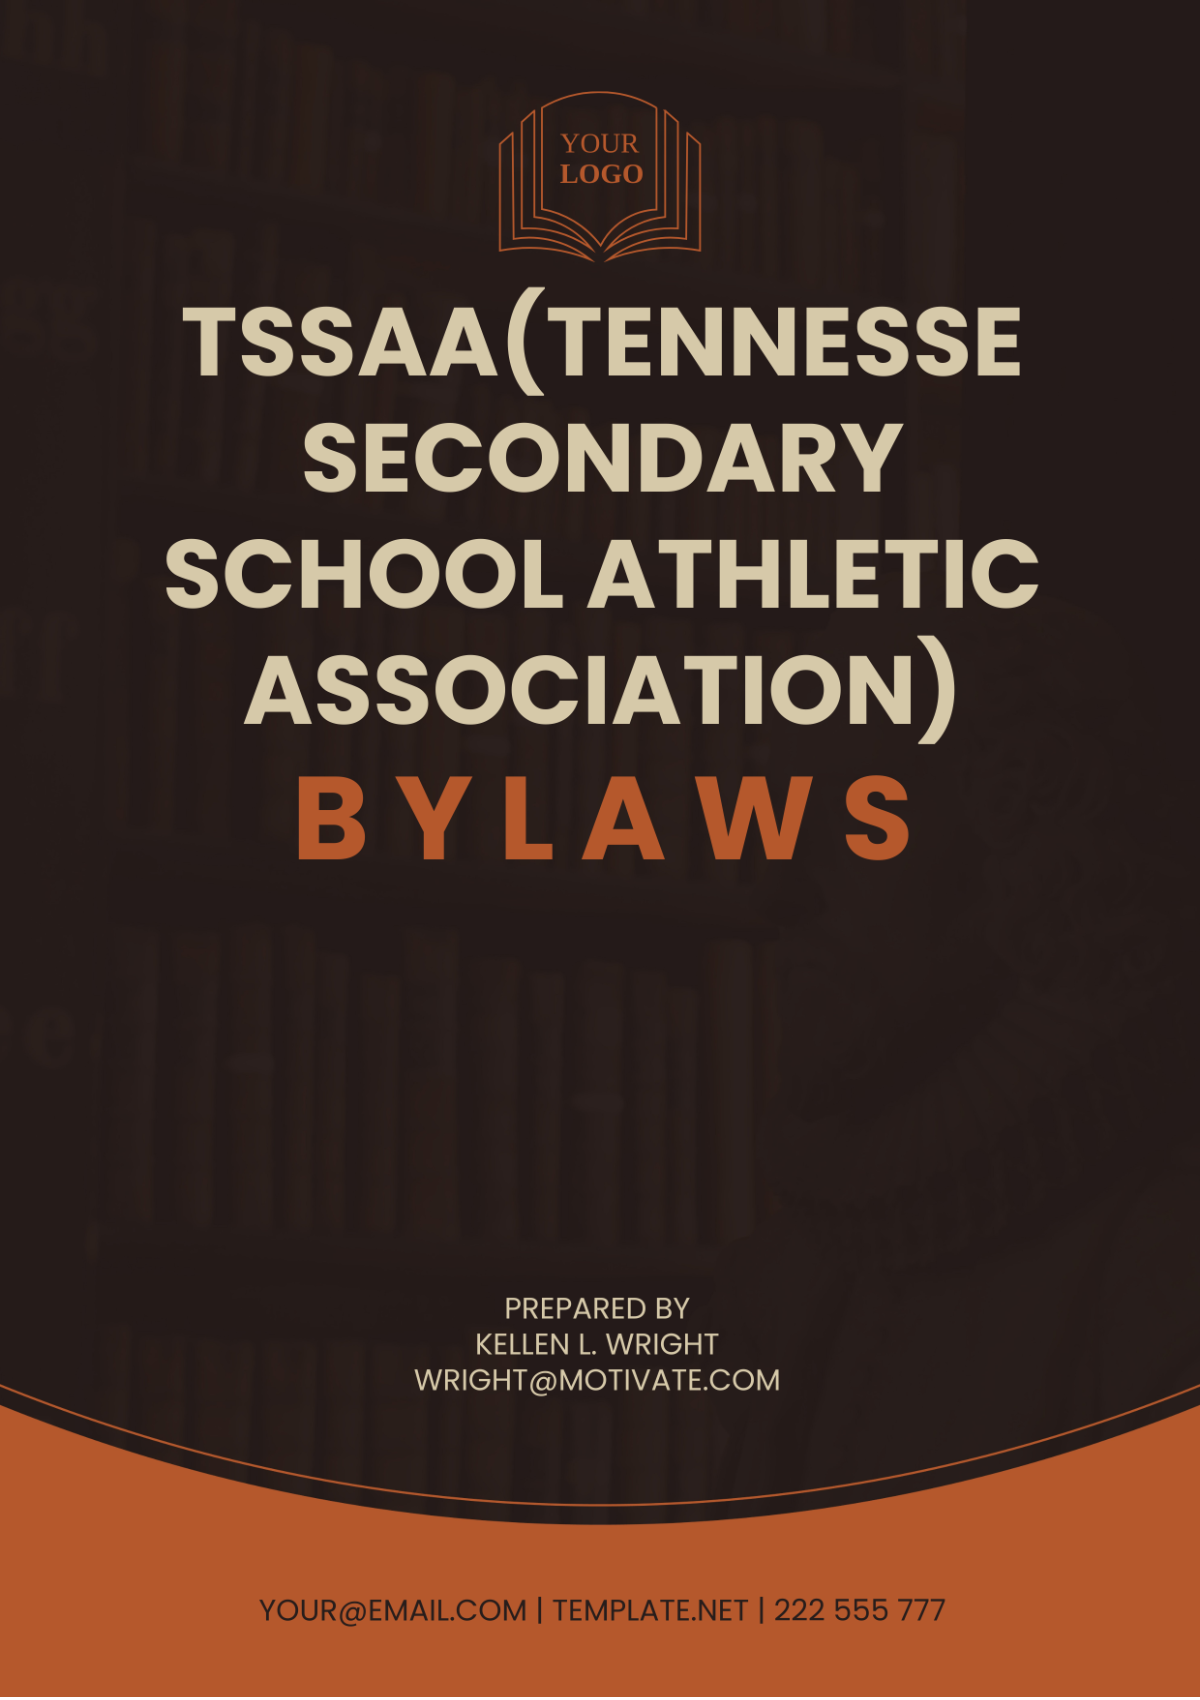 Free Tssaa(Tennessee Secondary School Athletic Association) Bylaws Template